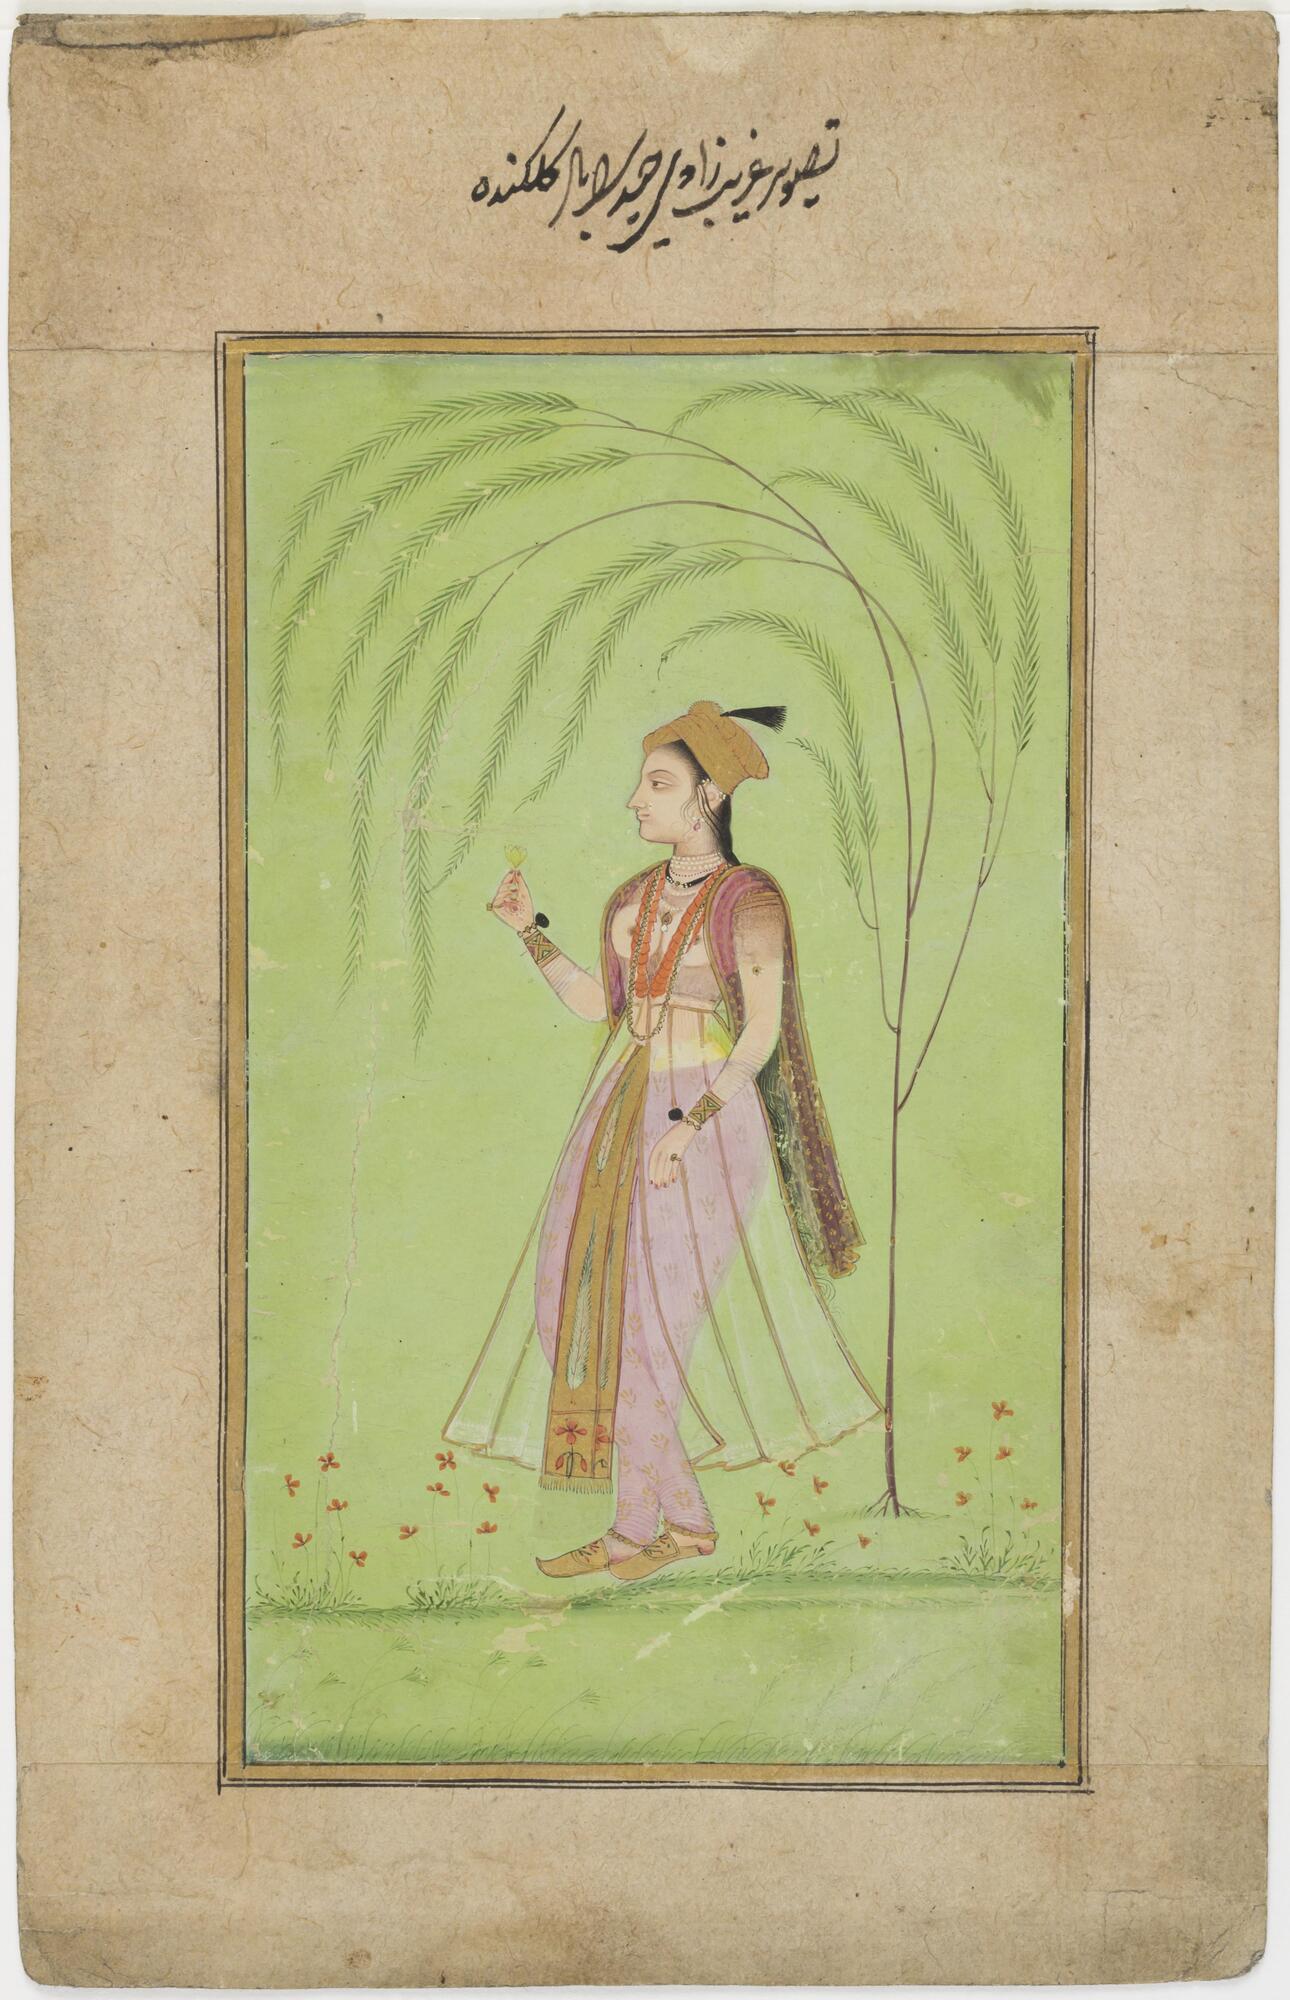 The lady stands against a bright green background with only a hint of physical setting. There are some ground lines at her feet with springs of red flowers and a simple stylized willow tree that curves around the figure. She stands with her body turning towards her right with her head in profile. She lifts a flower up in her right hand and hangs her left arms down past her waste. She wears tight lavender colored trousers with a diaphanous skirt covering them with a gold and colored brocaded scarf hanging down the center. Her breasts appear bare, but actually the blouse is also sheer, with a darker color at the shoulders and below her breasts. She wears gold brocade slippers and wide bracelets with black pompoms and rings, necklaces, earrings and a scarf hangs from her shoulders. A gold turban with a black aigrette crowns her. The portrait is framed with some gold and black lines and placed on a simple, buff colored border. An inscription in nastaliq&lsquo; script is above the painting.